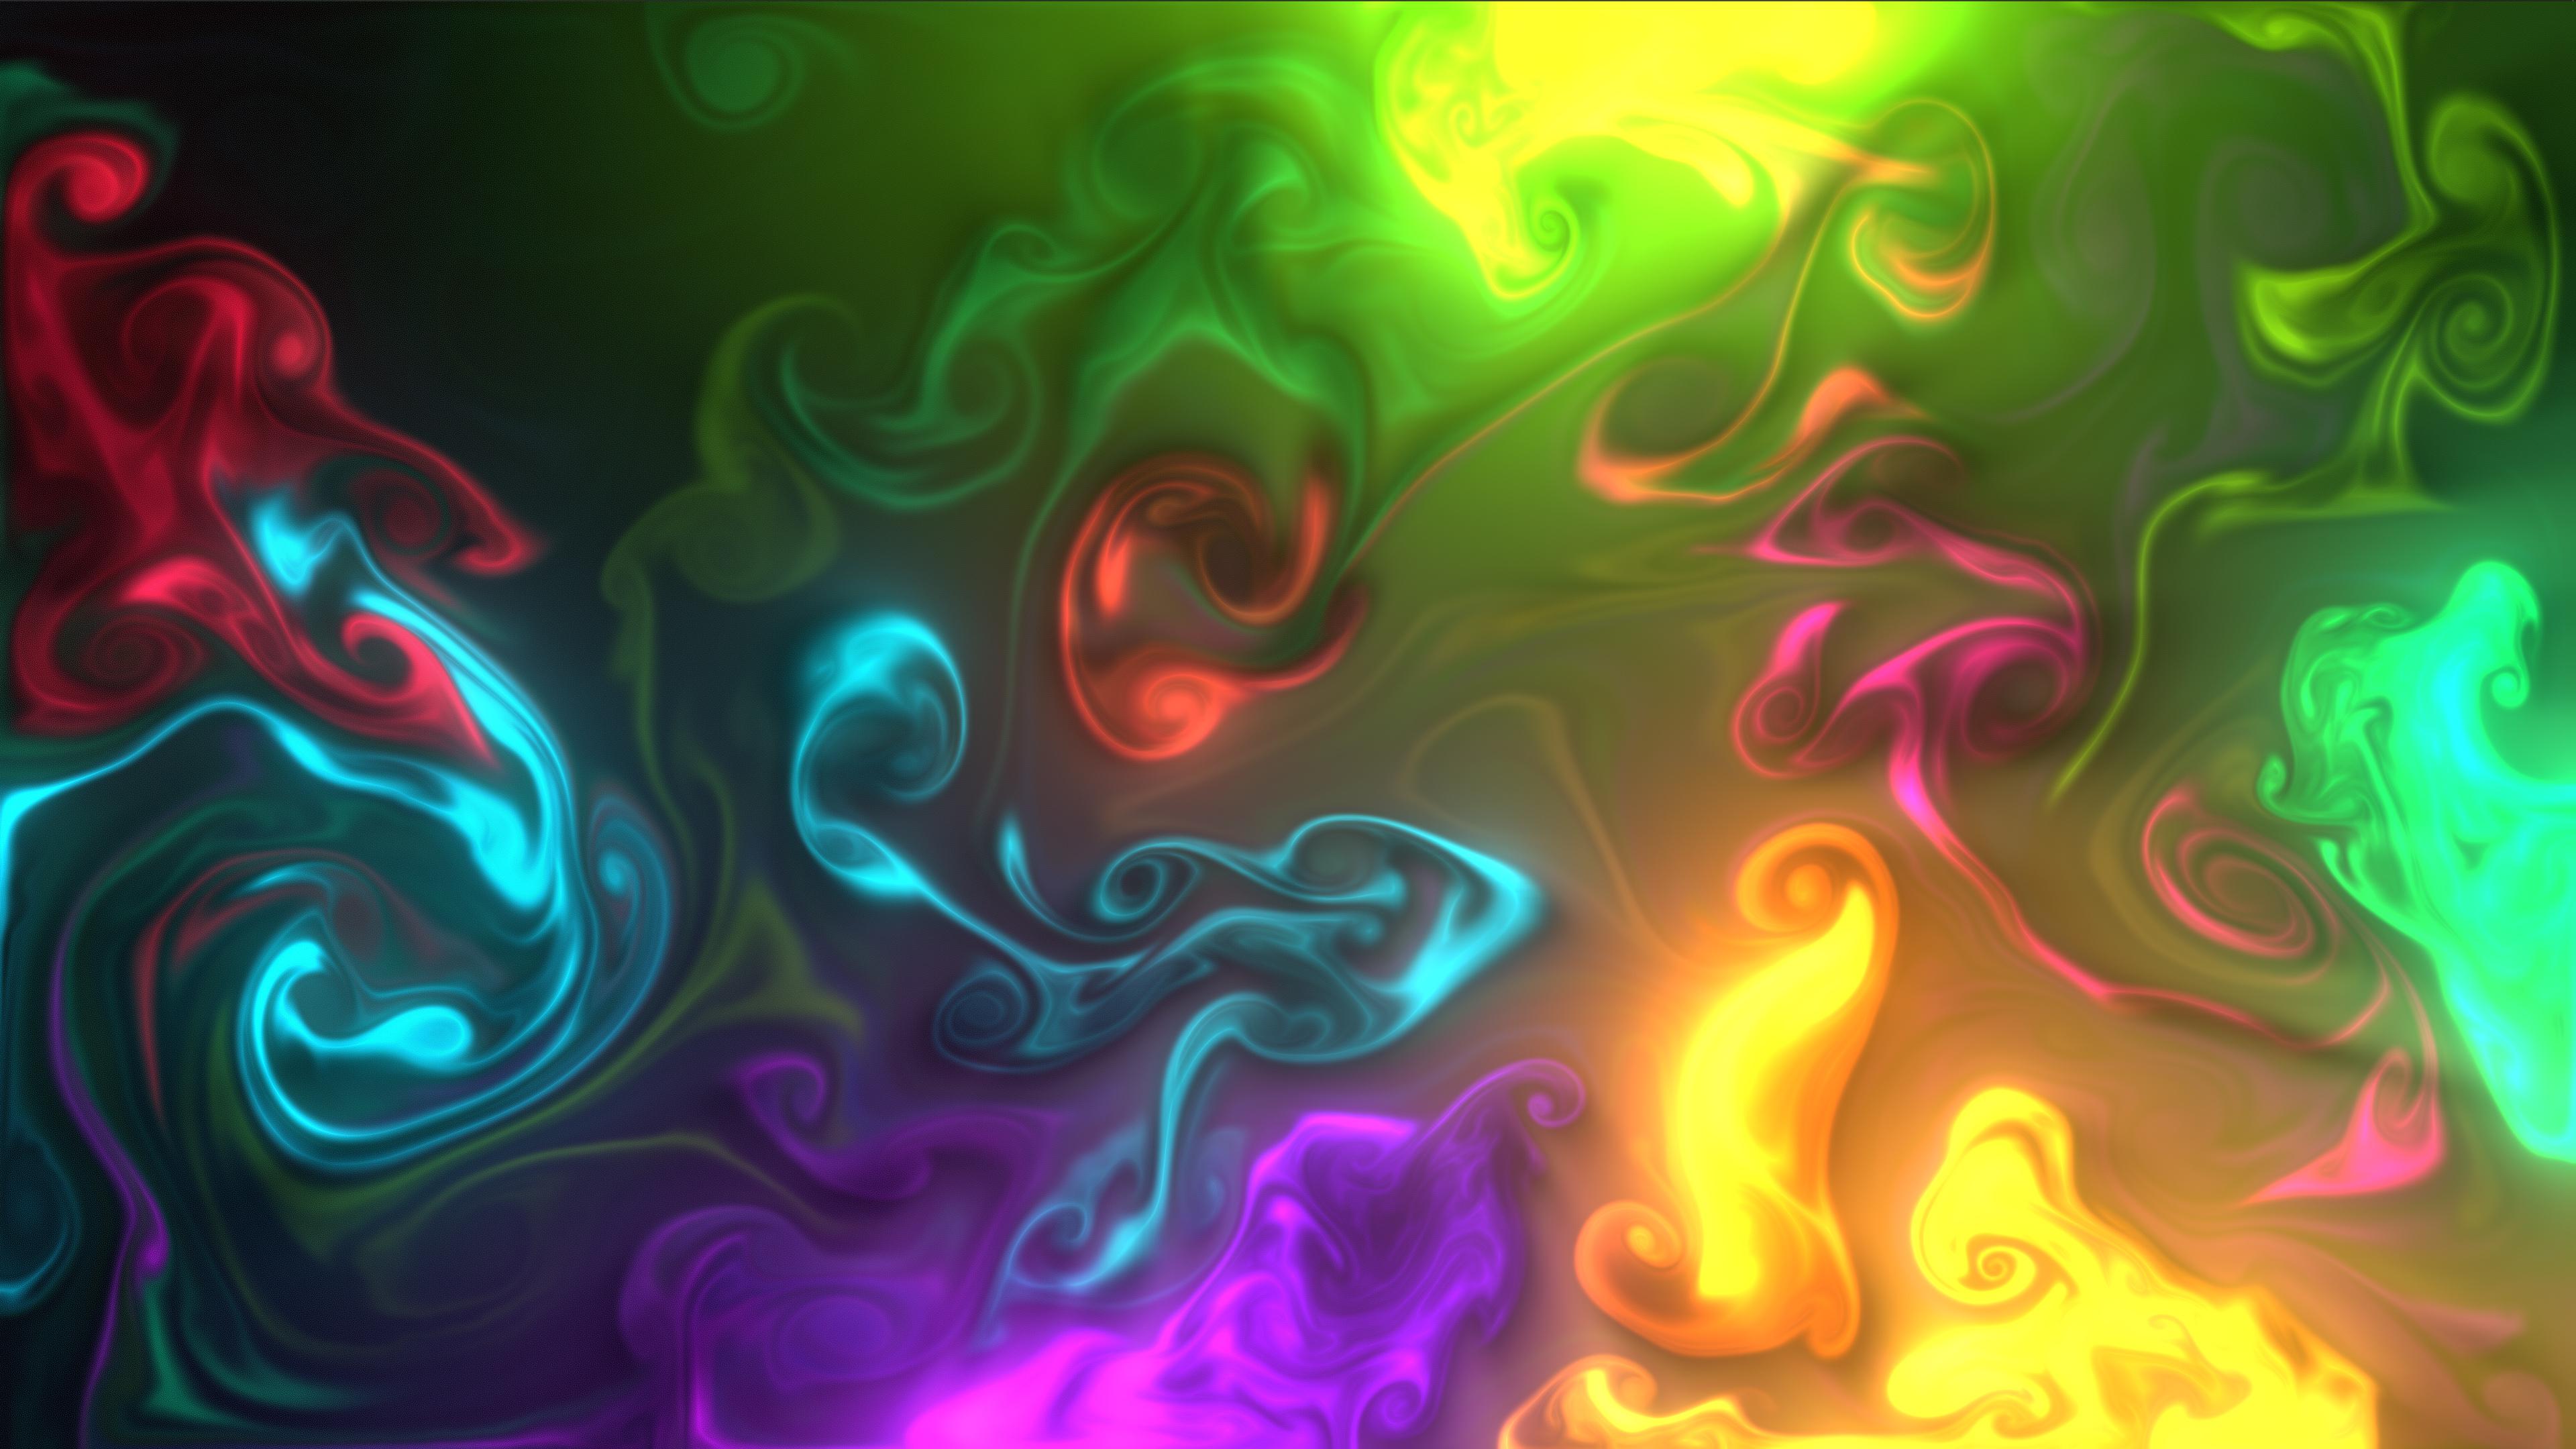 Fluid 4K wallpaper for your desktop or mobile screen free and easy to download